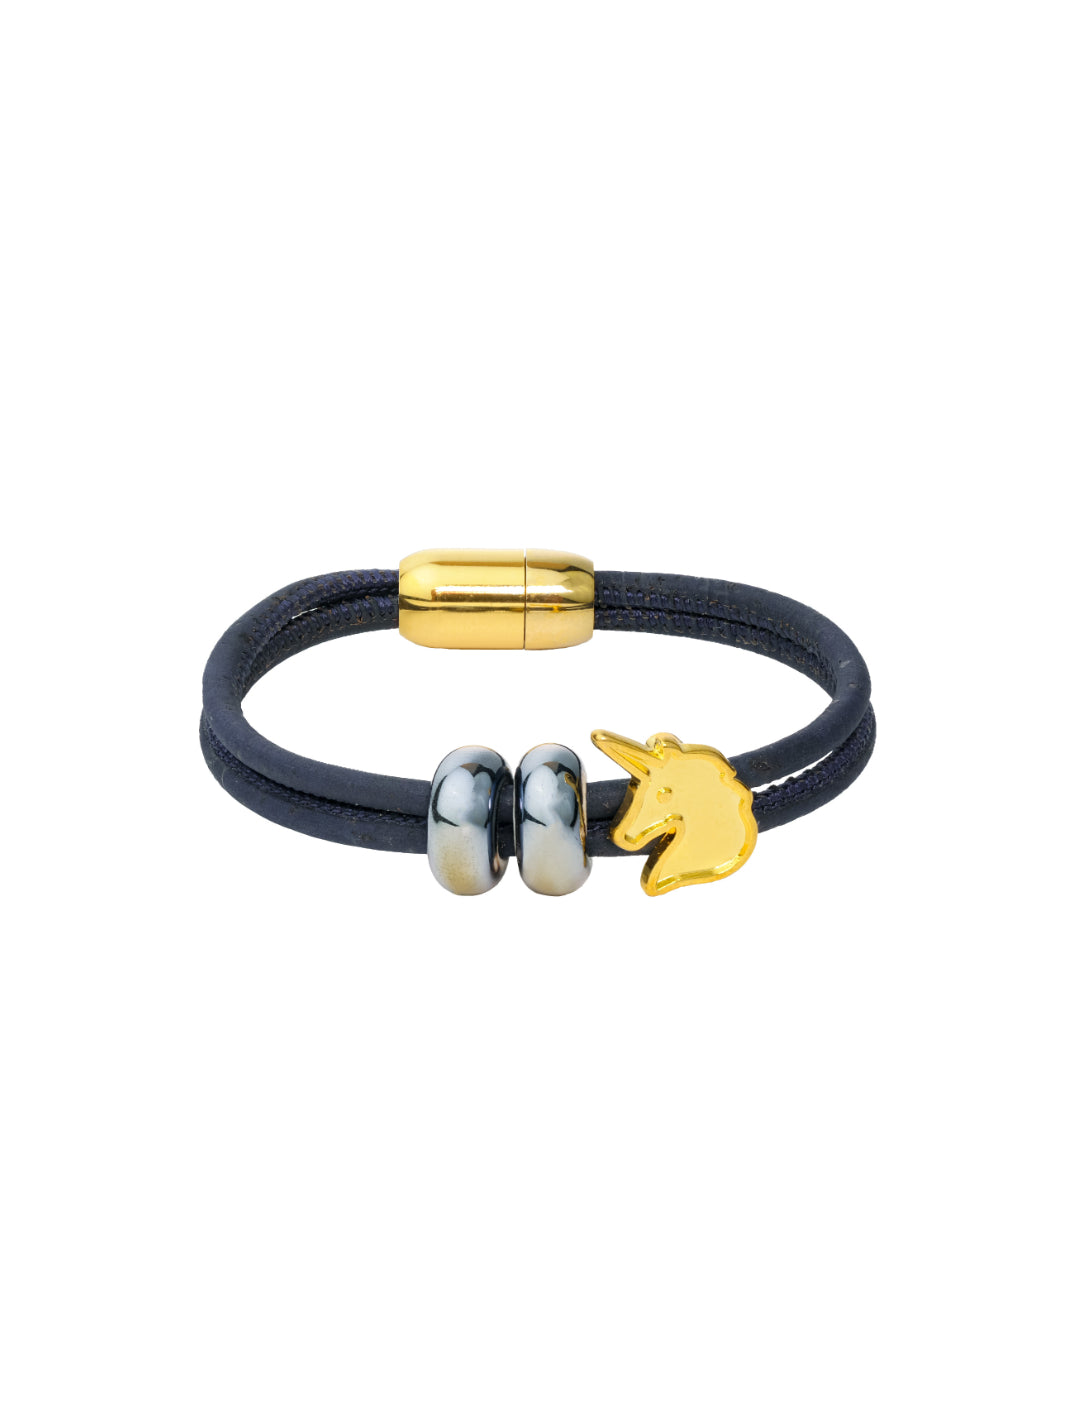 Introducing the enchanting 'UNICORN Cork Bracelet': A whimsical blend of sustainable materials, adorned with gold plating. Lightweight, with a magnetic clasp for everyday elegance.